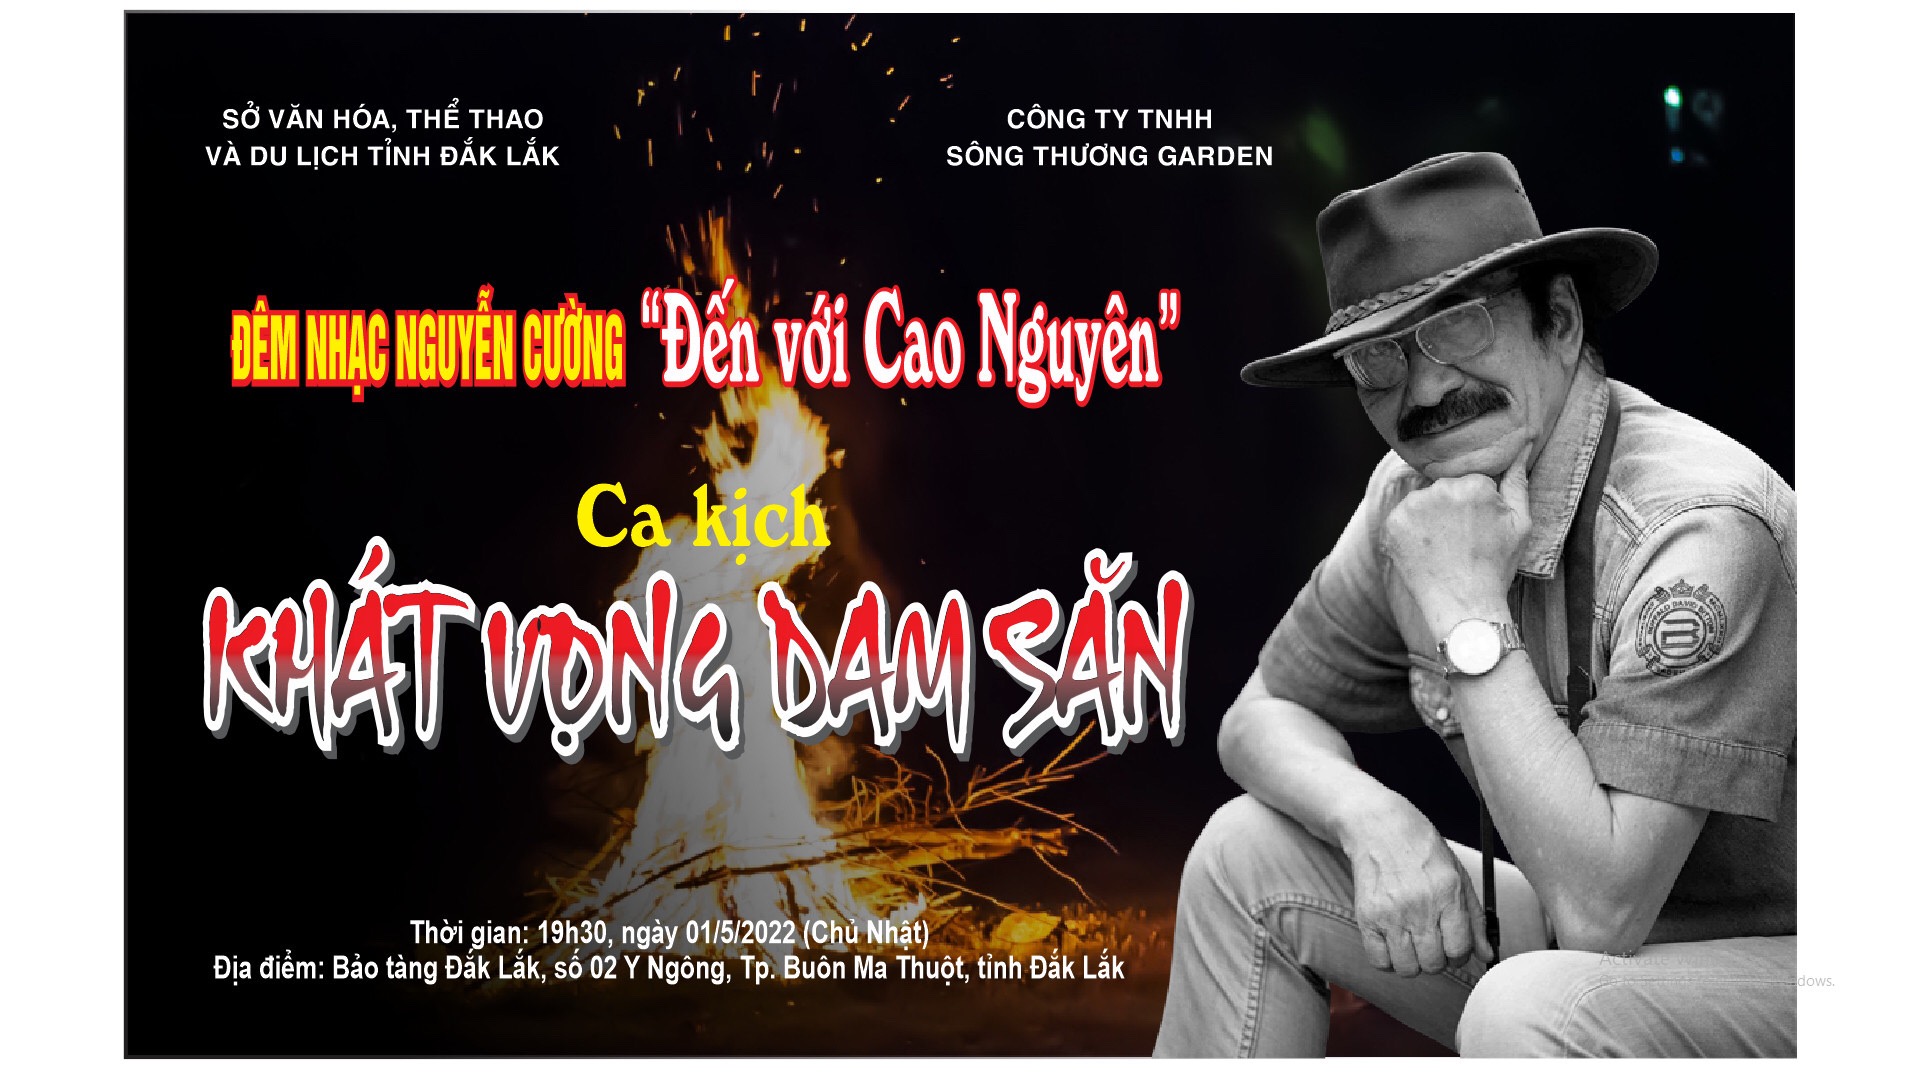 Nguyen Cuong musical evening "Come to the Highlands"